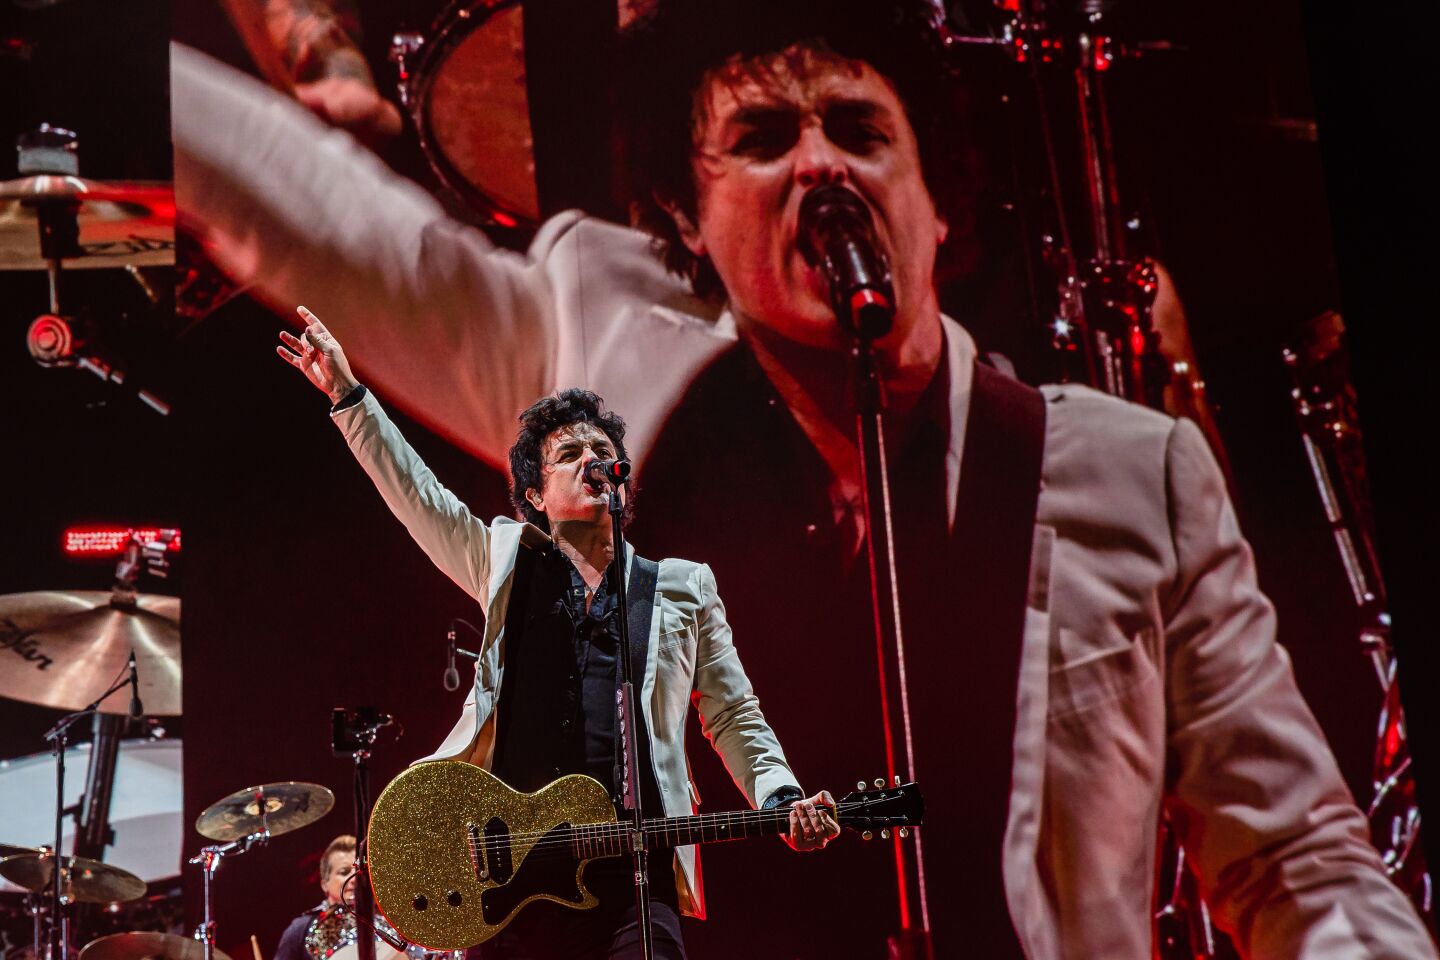 Singer Billie Joe Armstrong of Green Day during the Hella Mega Tour at Petco Park in downtown San Diego on August 29, 2021.